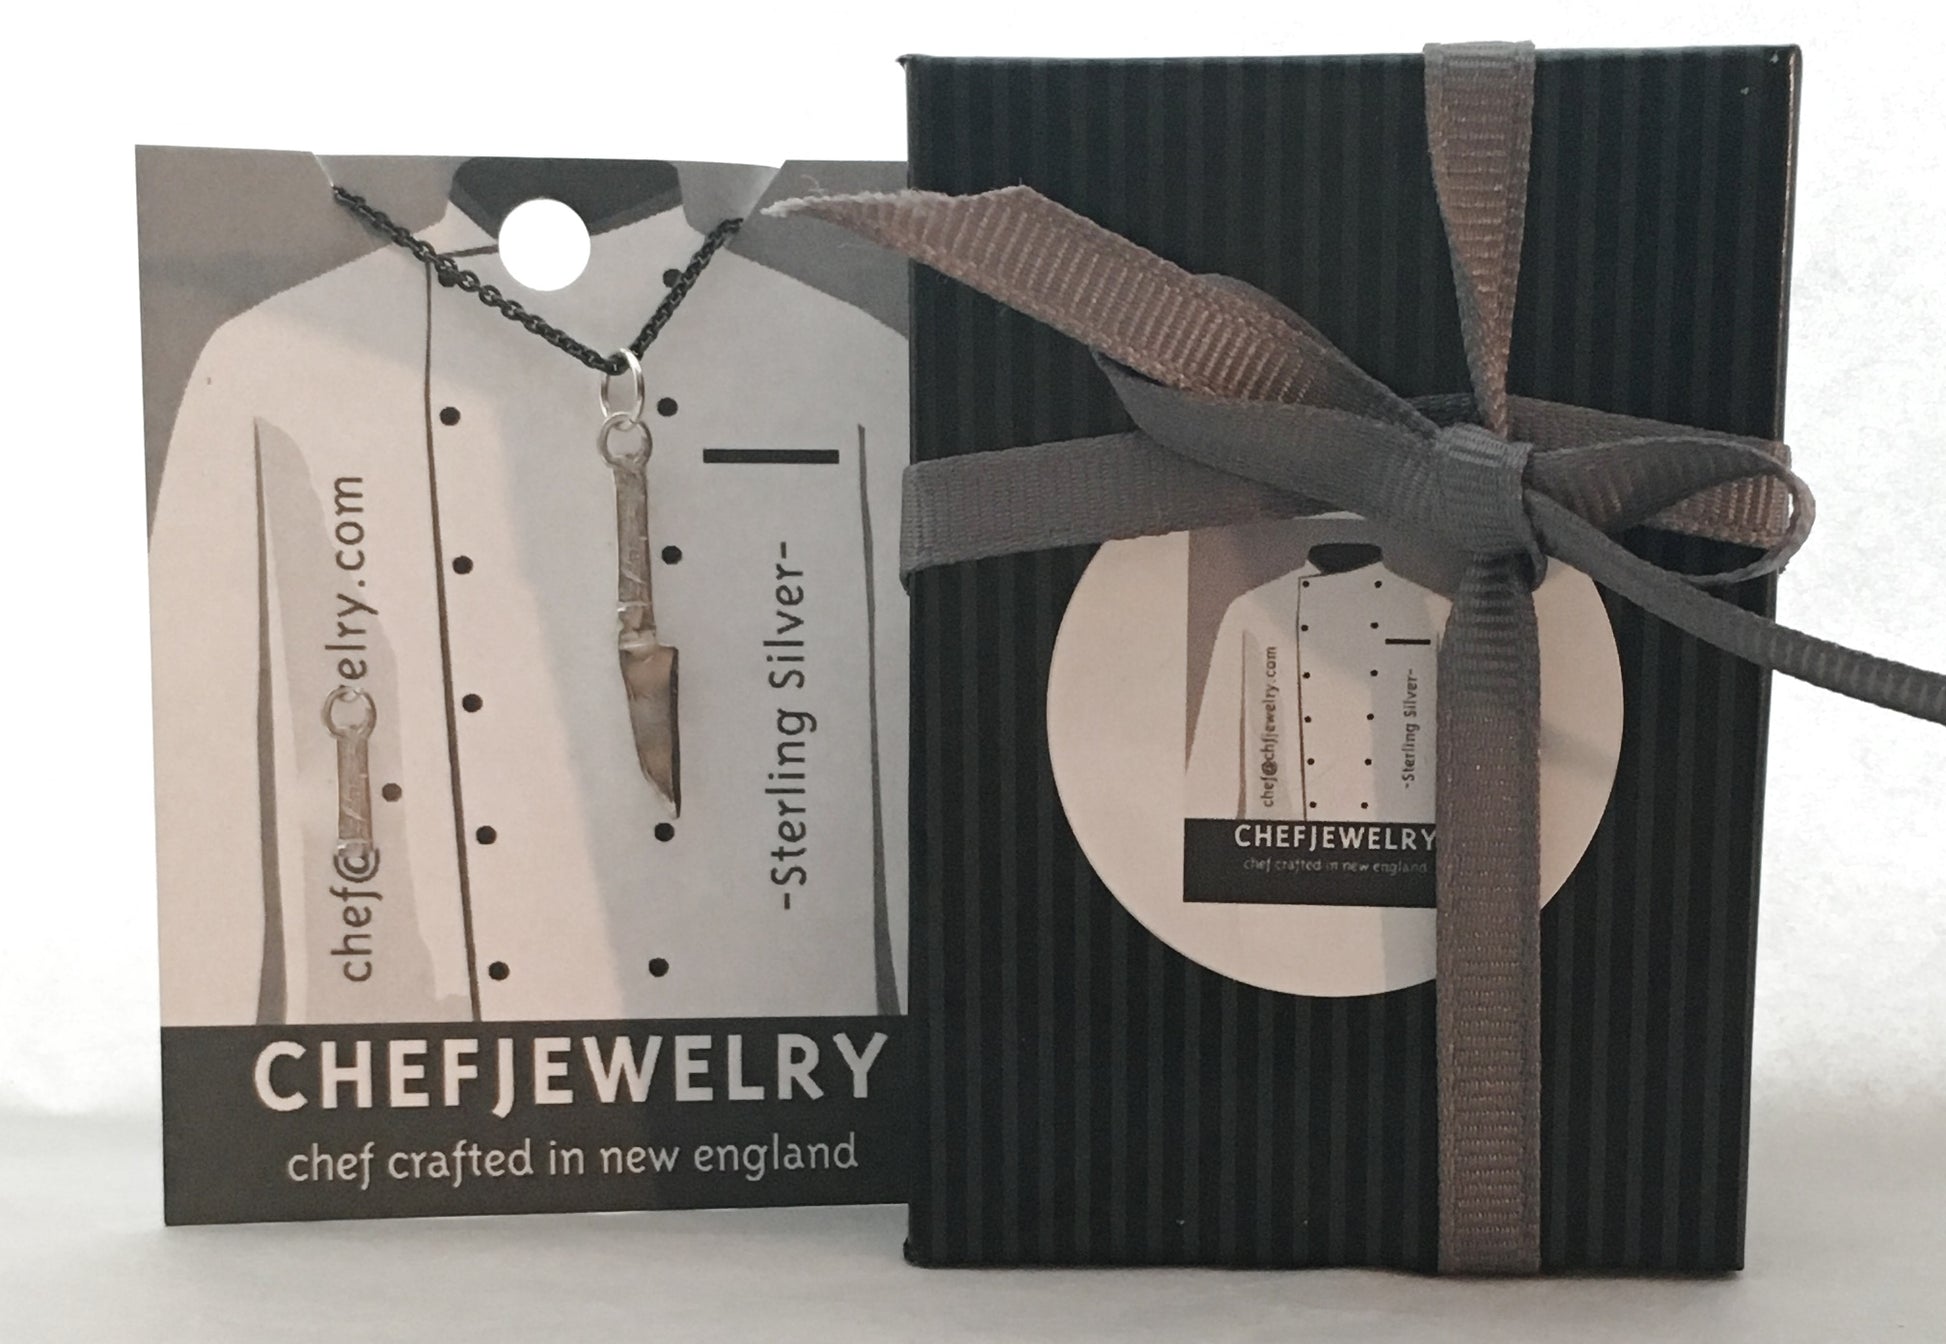 your chefjewelry cufflinks will arrive with custom chefjewelry packaging